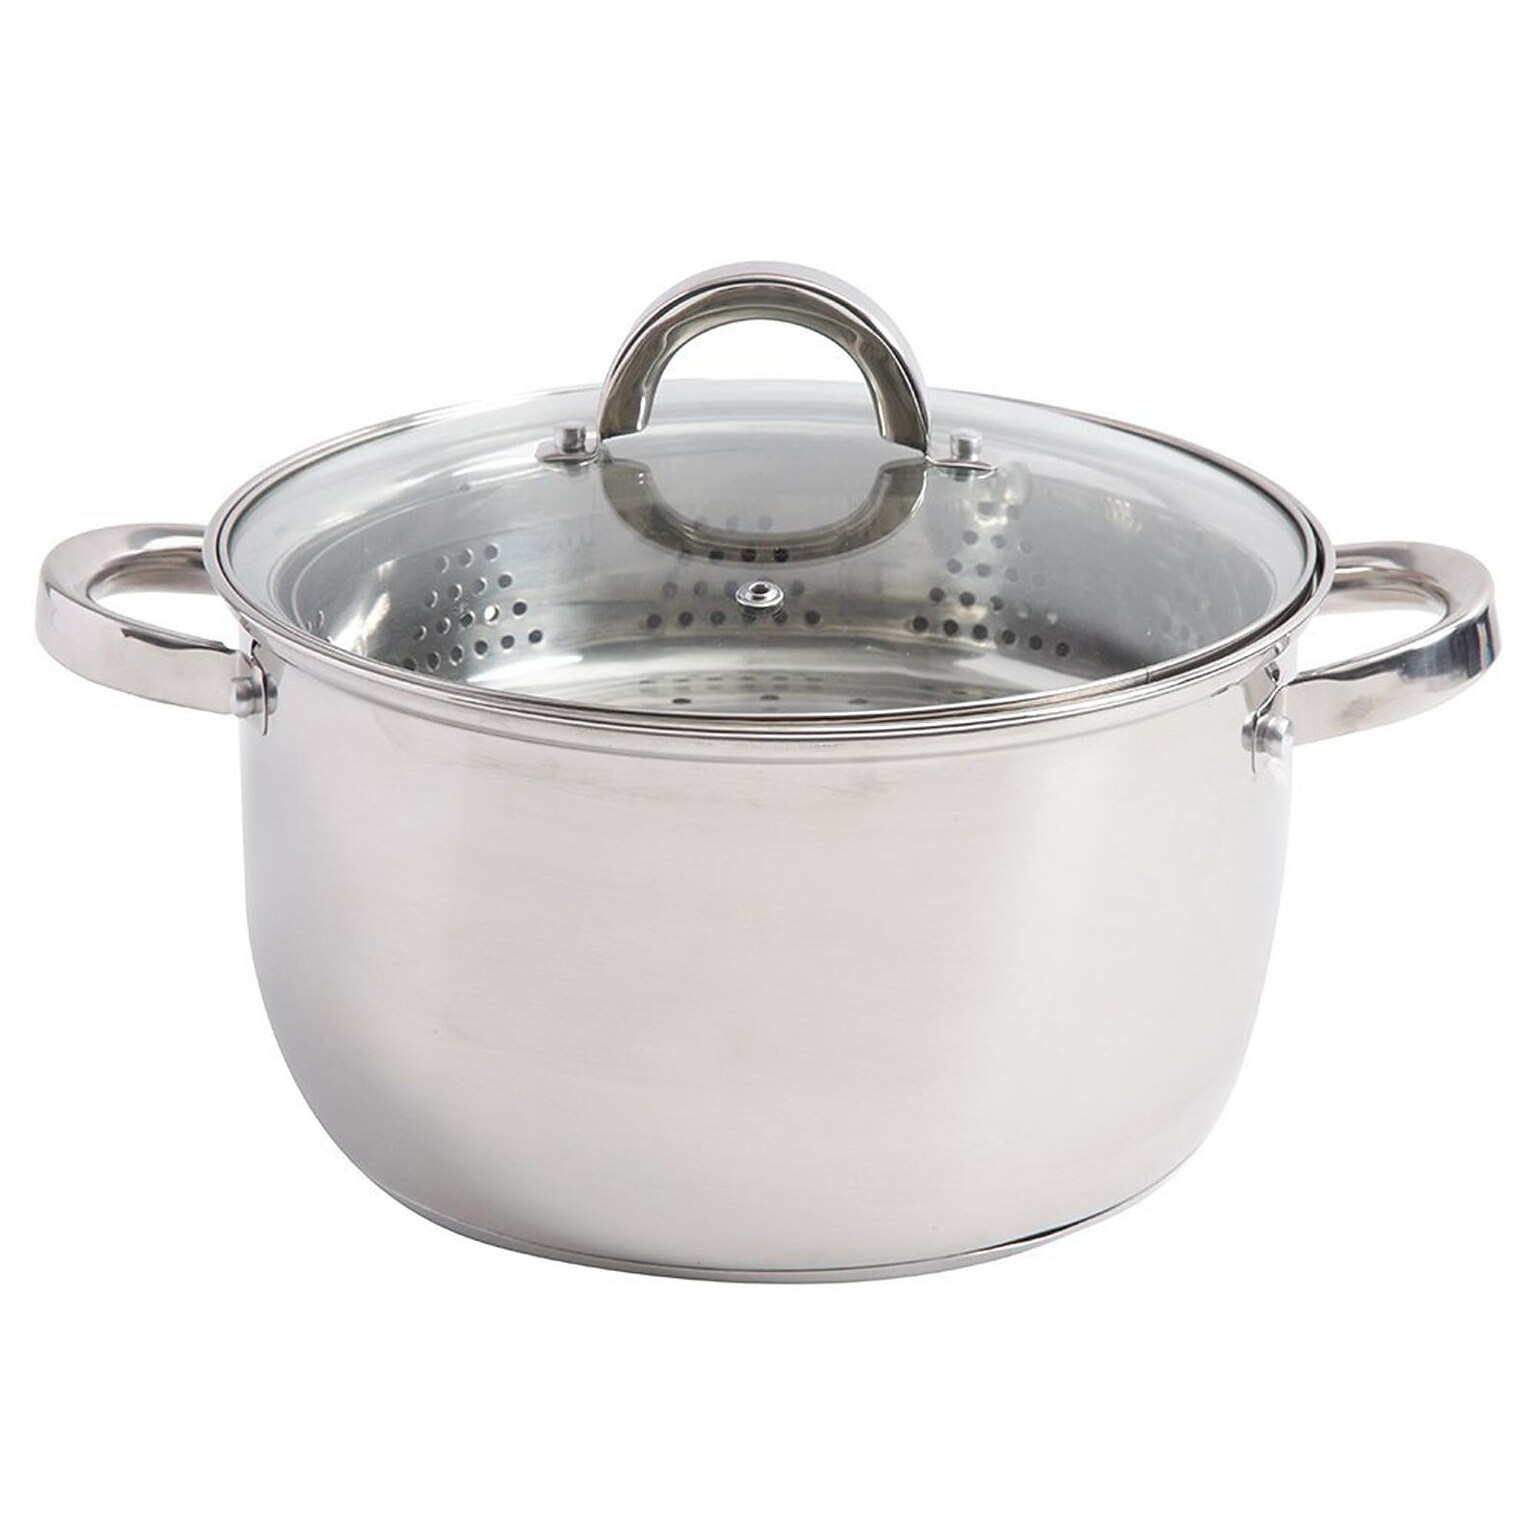 Oster Sangerfield 6 Qt Casserole with Steamer Insert and Lid, (111922.03)